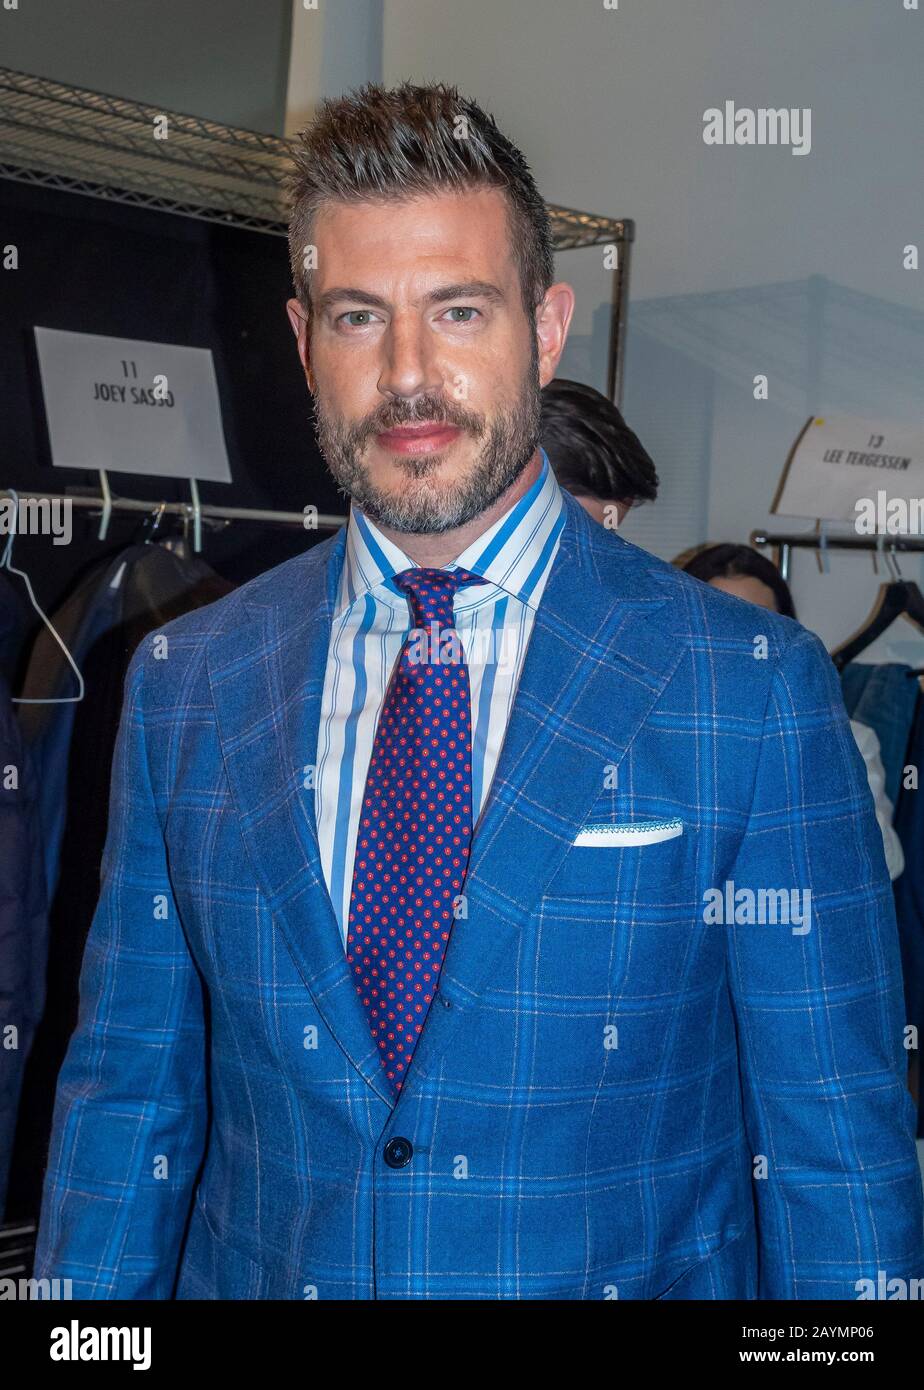 New York, NY, USA - February 5, 2020: Jesse Palmer attends The Blue Jacket runway Show in support of mens health and prostate cancer awareness at Pier Stock Photo